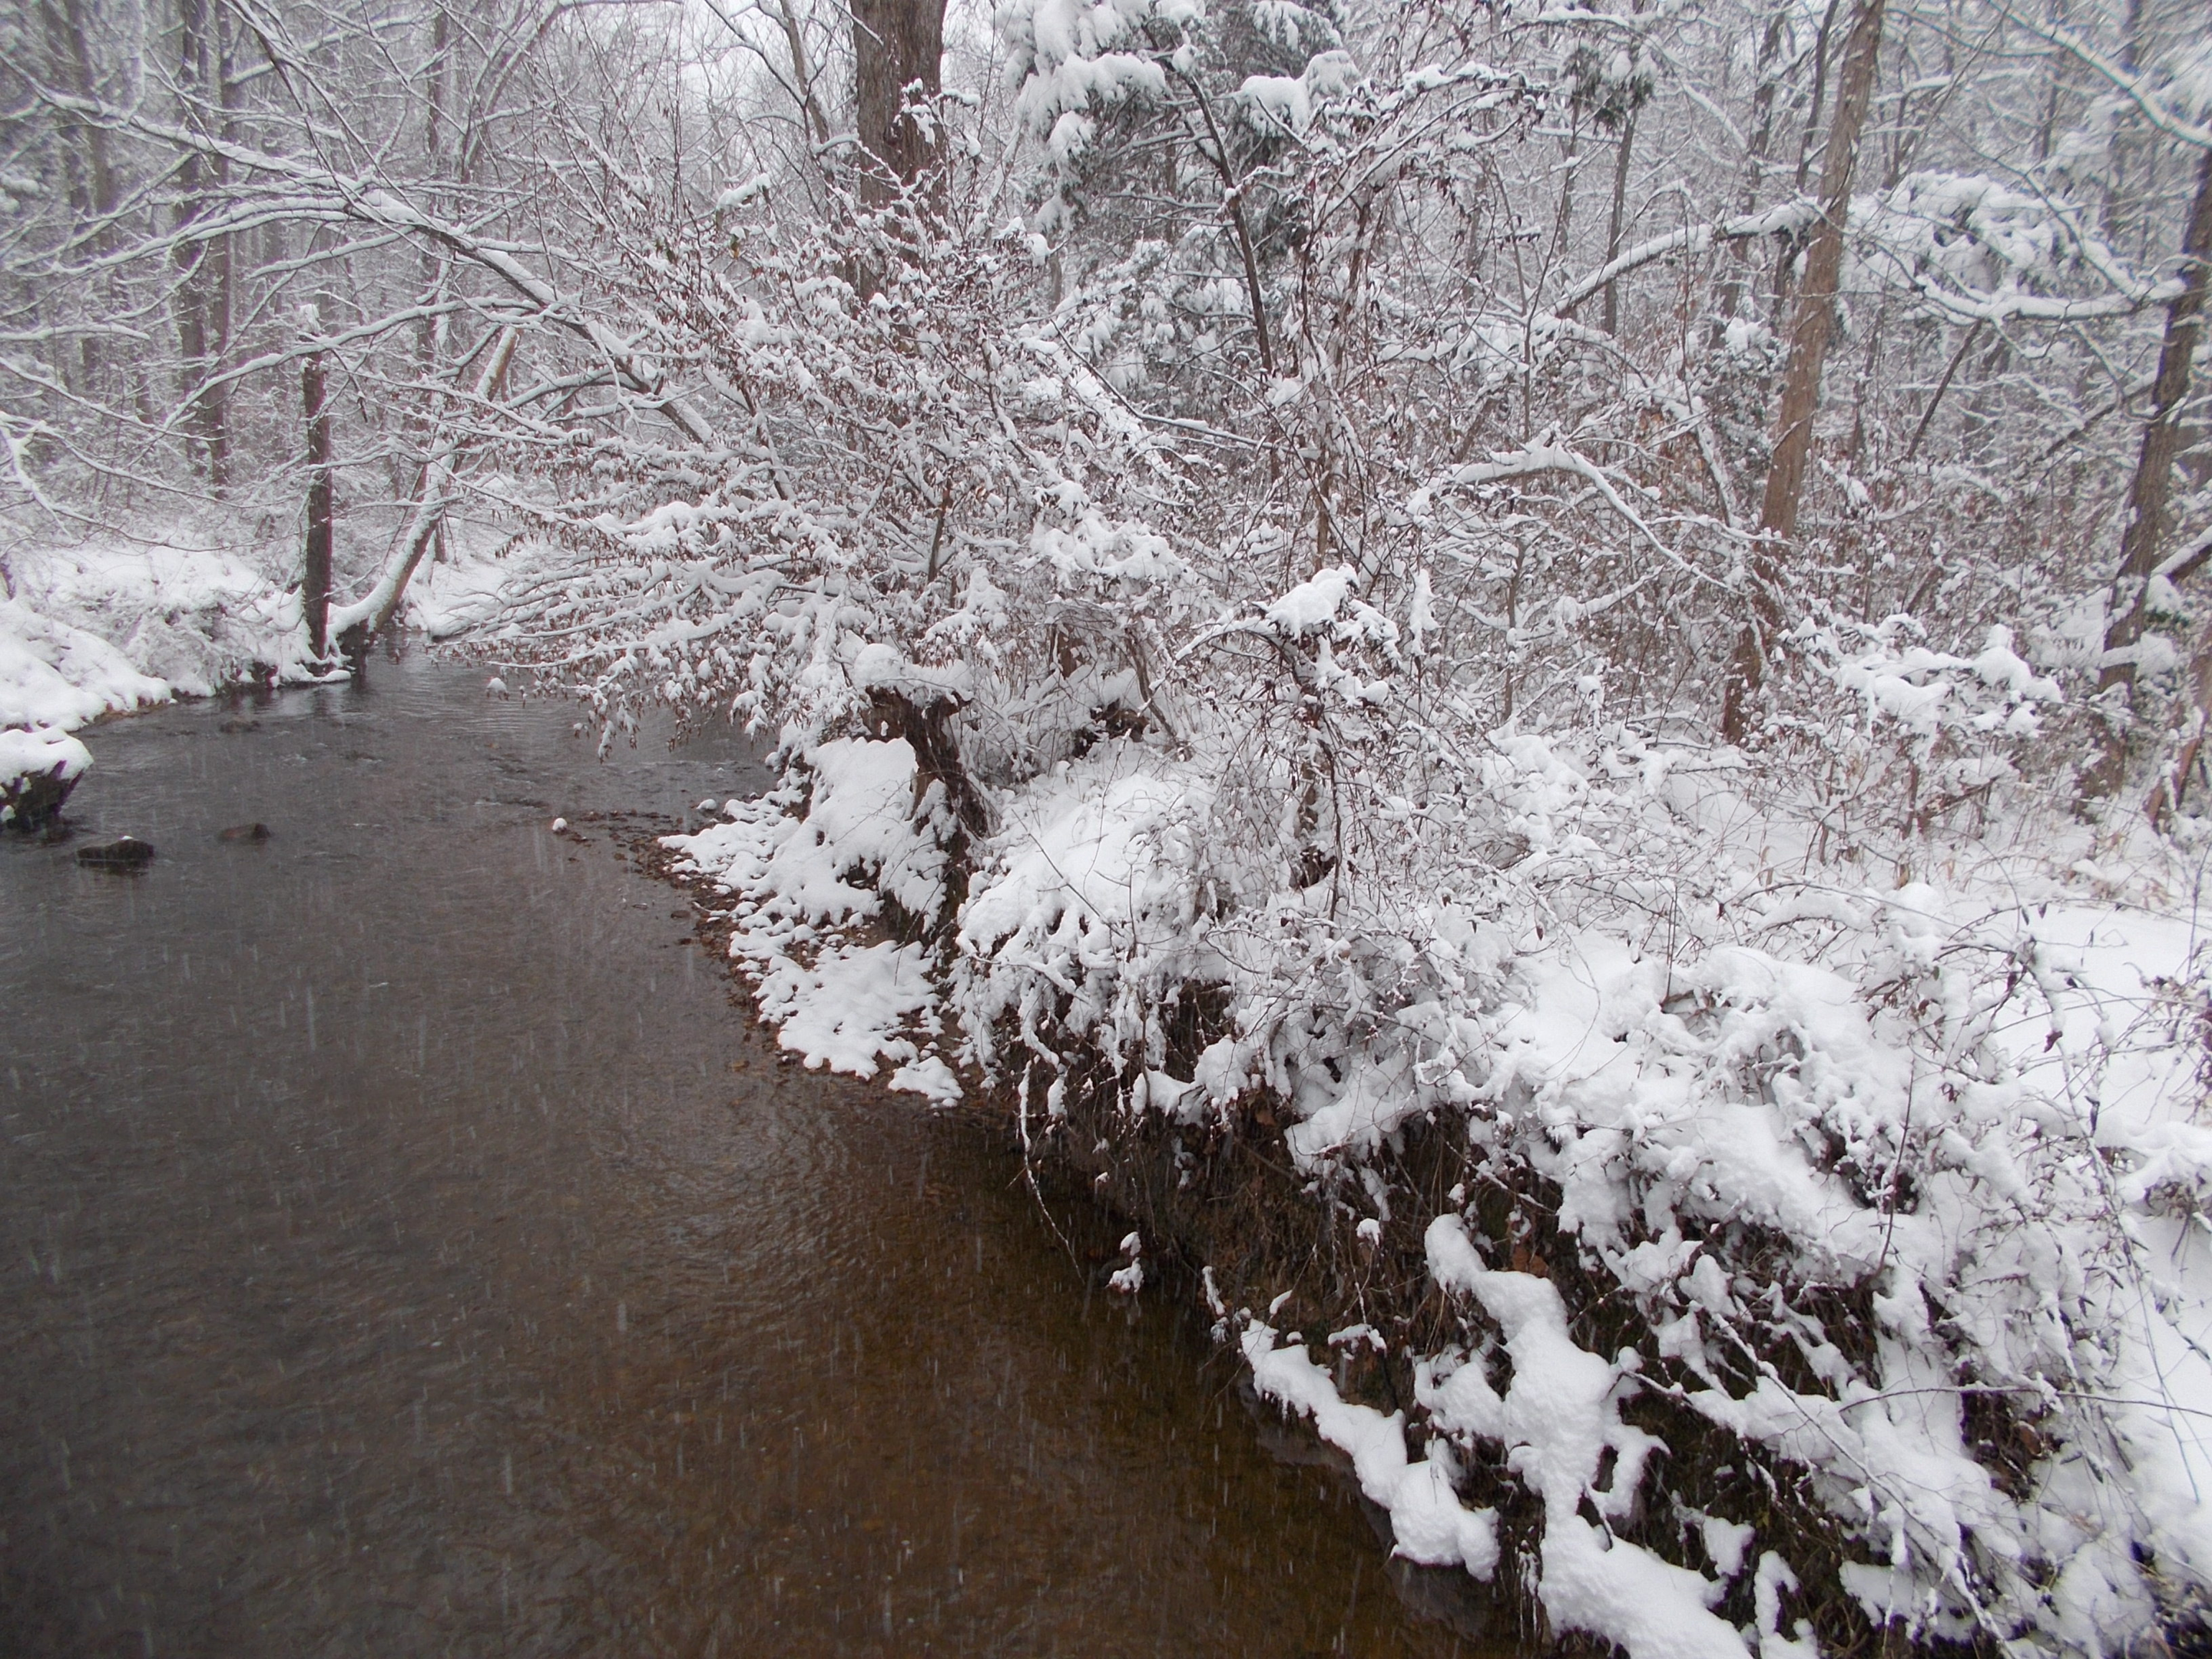 Pohick Creek on a winter's day